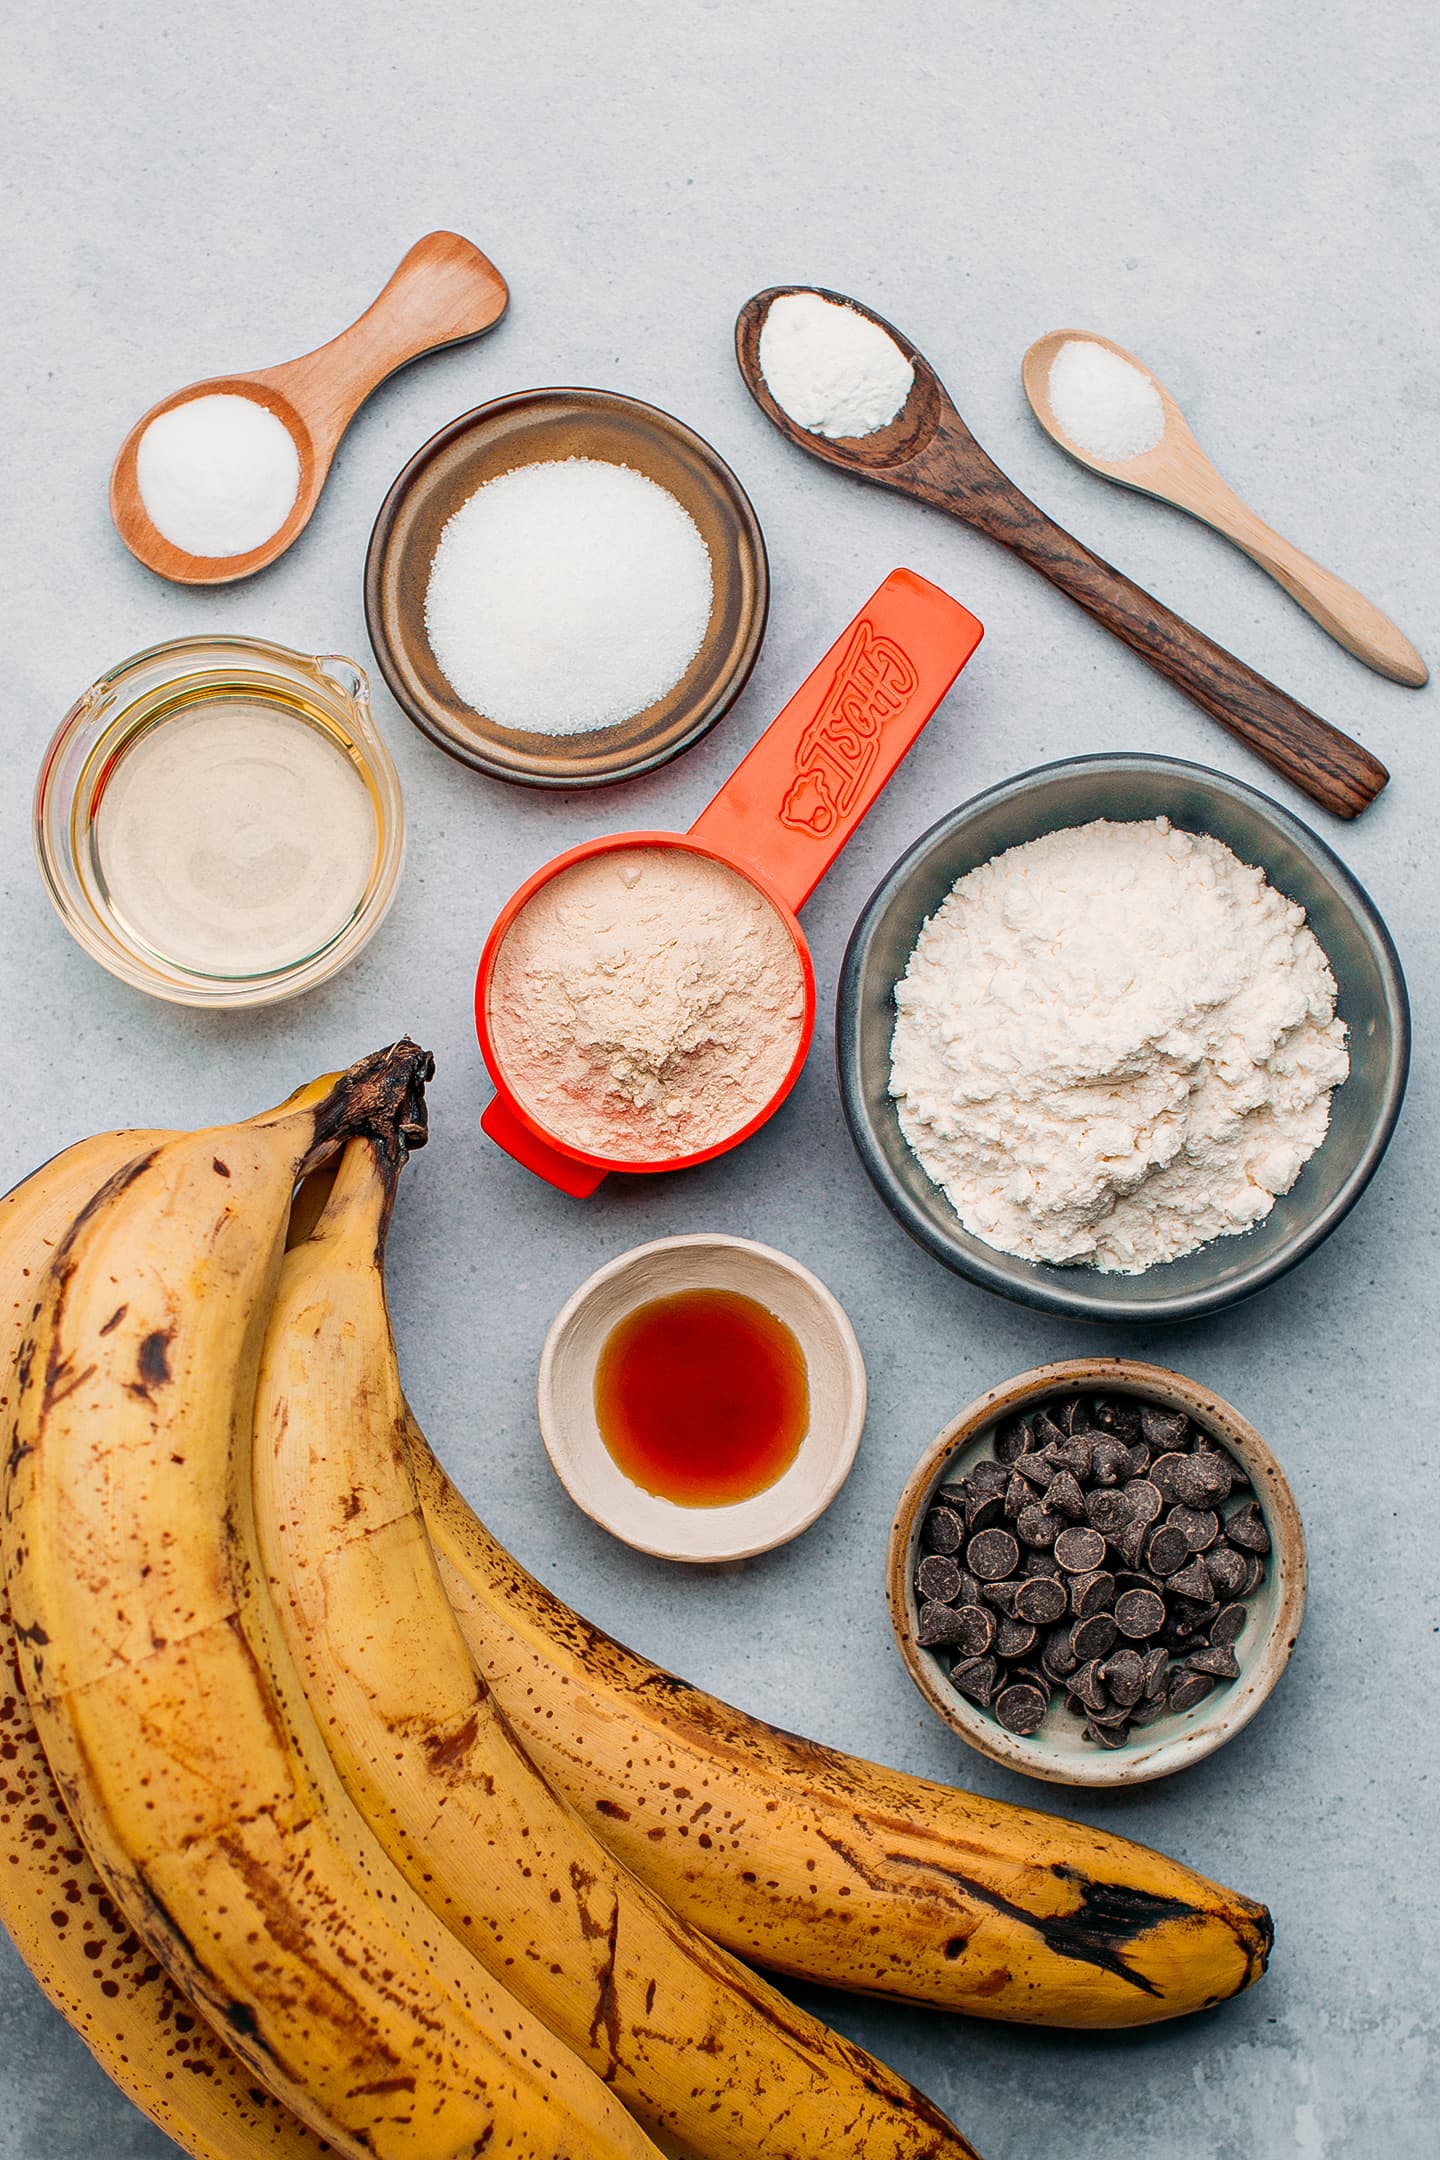 Ingredients like bananas, flour, protein powder, chocolate chips, and vanilla extract.